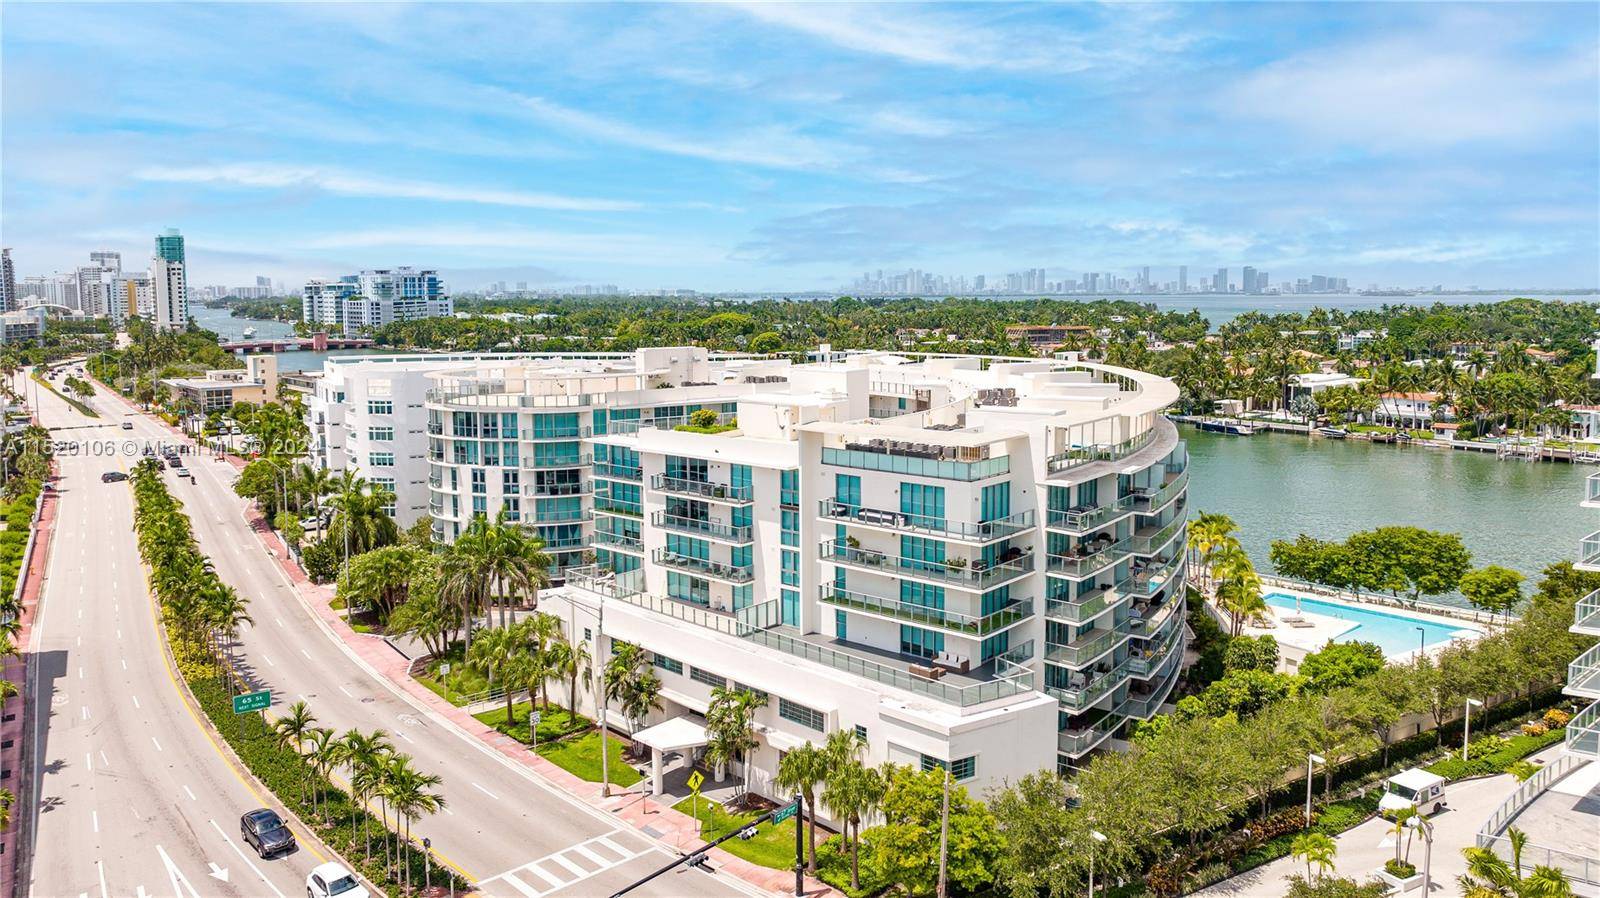 Introducing a charming and luxury 2 bed, 2 bath condo in the heart of Miami Beach.